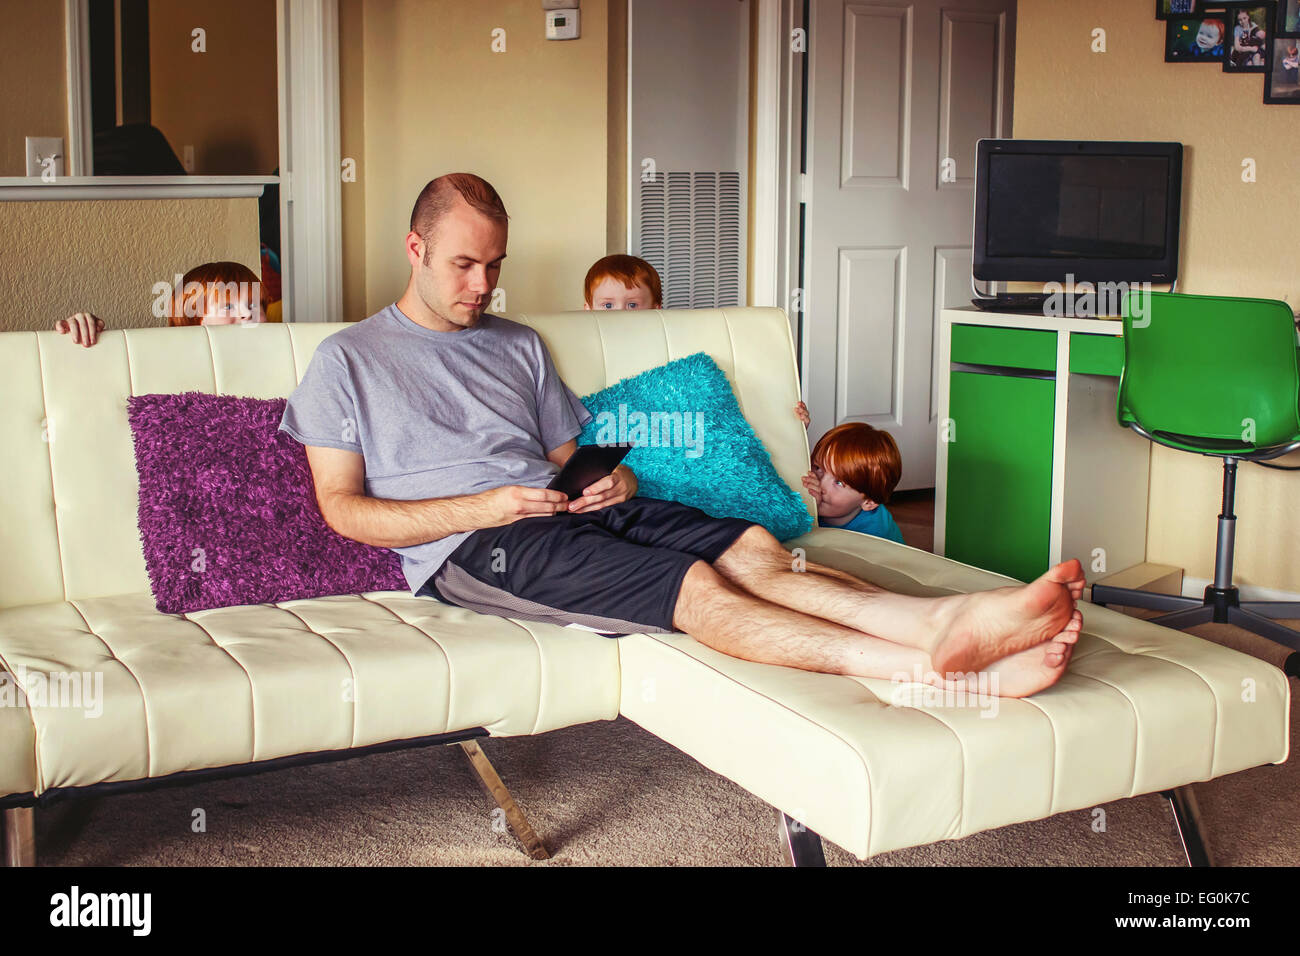 Three young boys hiding behind couch ready to surprise their father Stock Photo